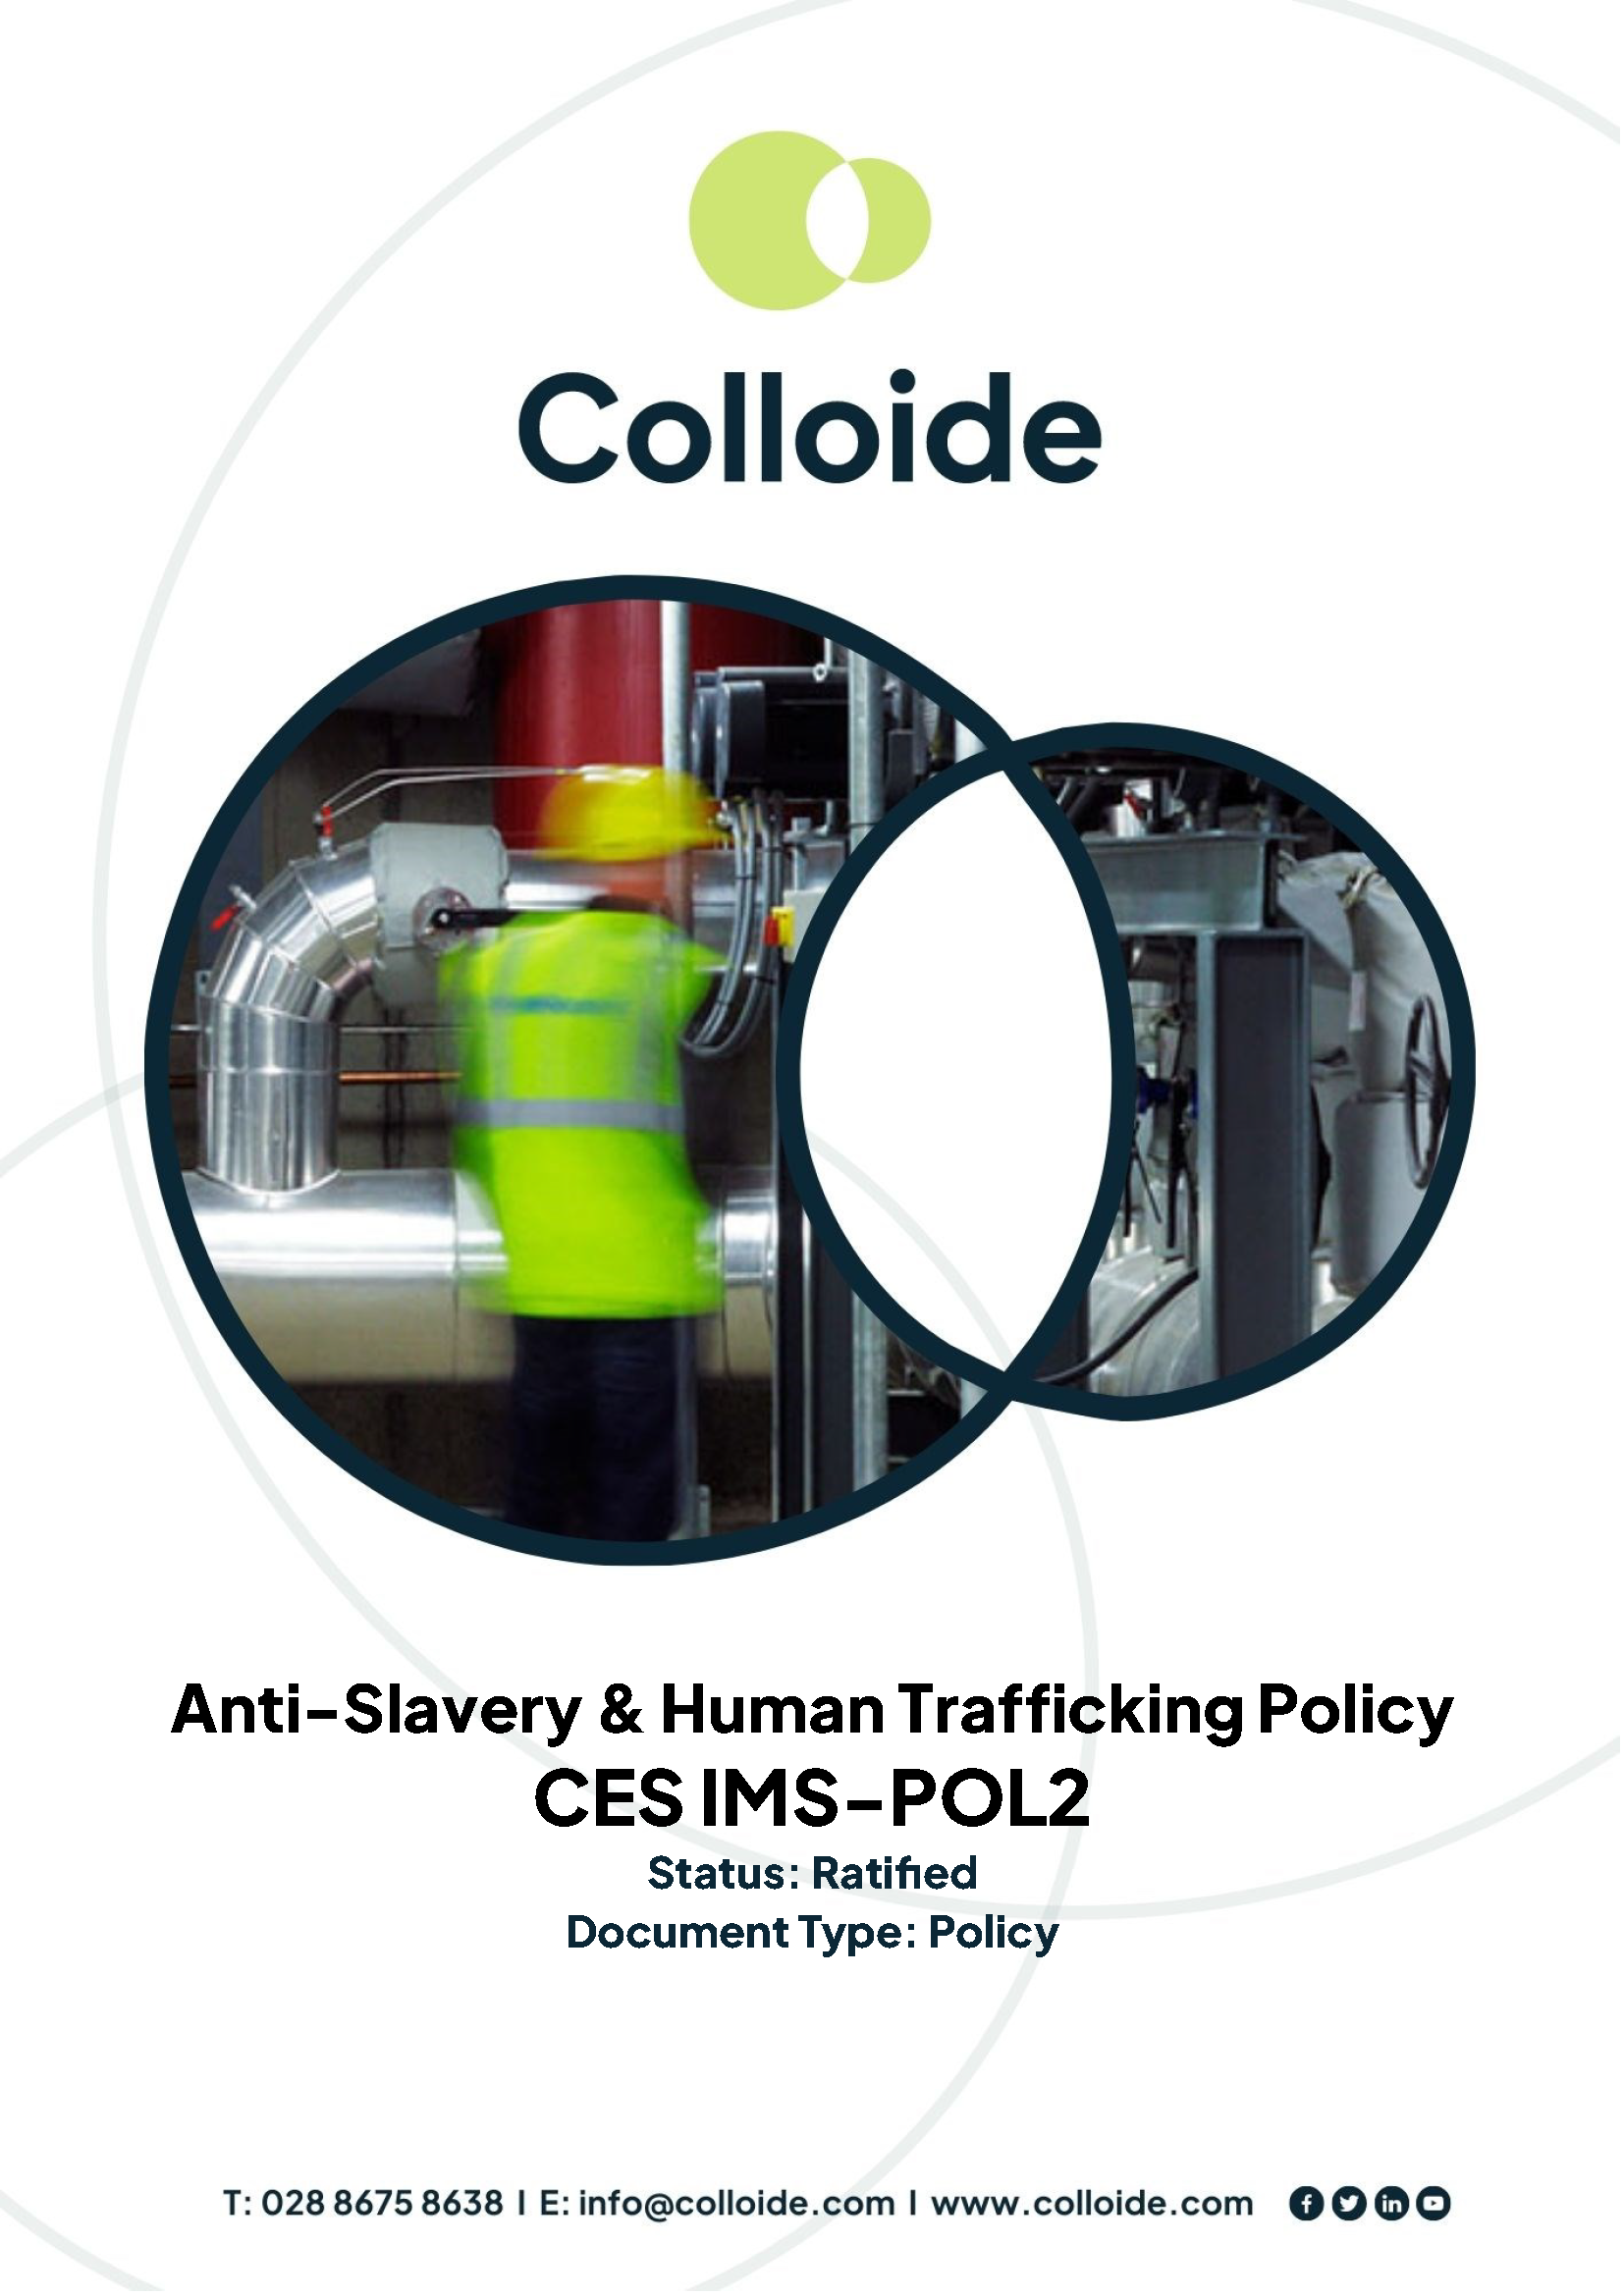 Cover Image for CES IMS-POL2 – Anti-Slavery & Human Trafficking Policy